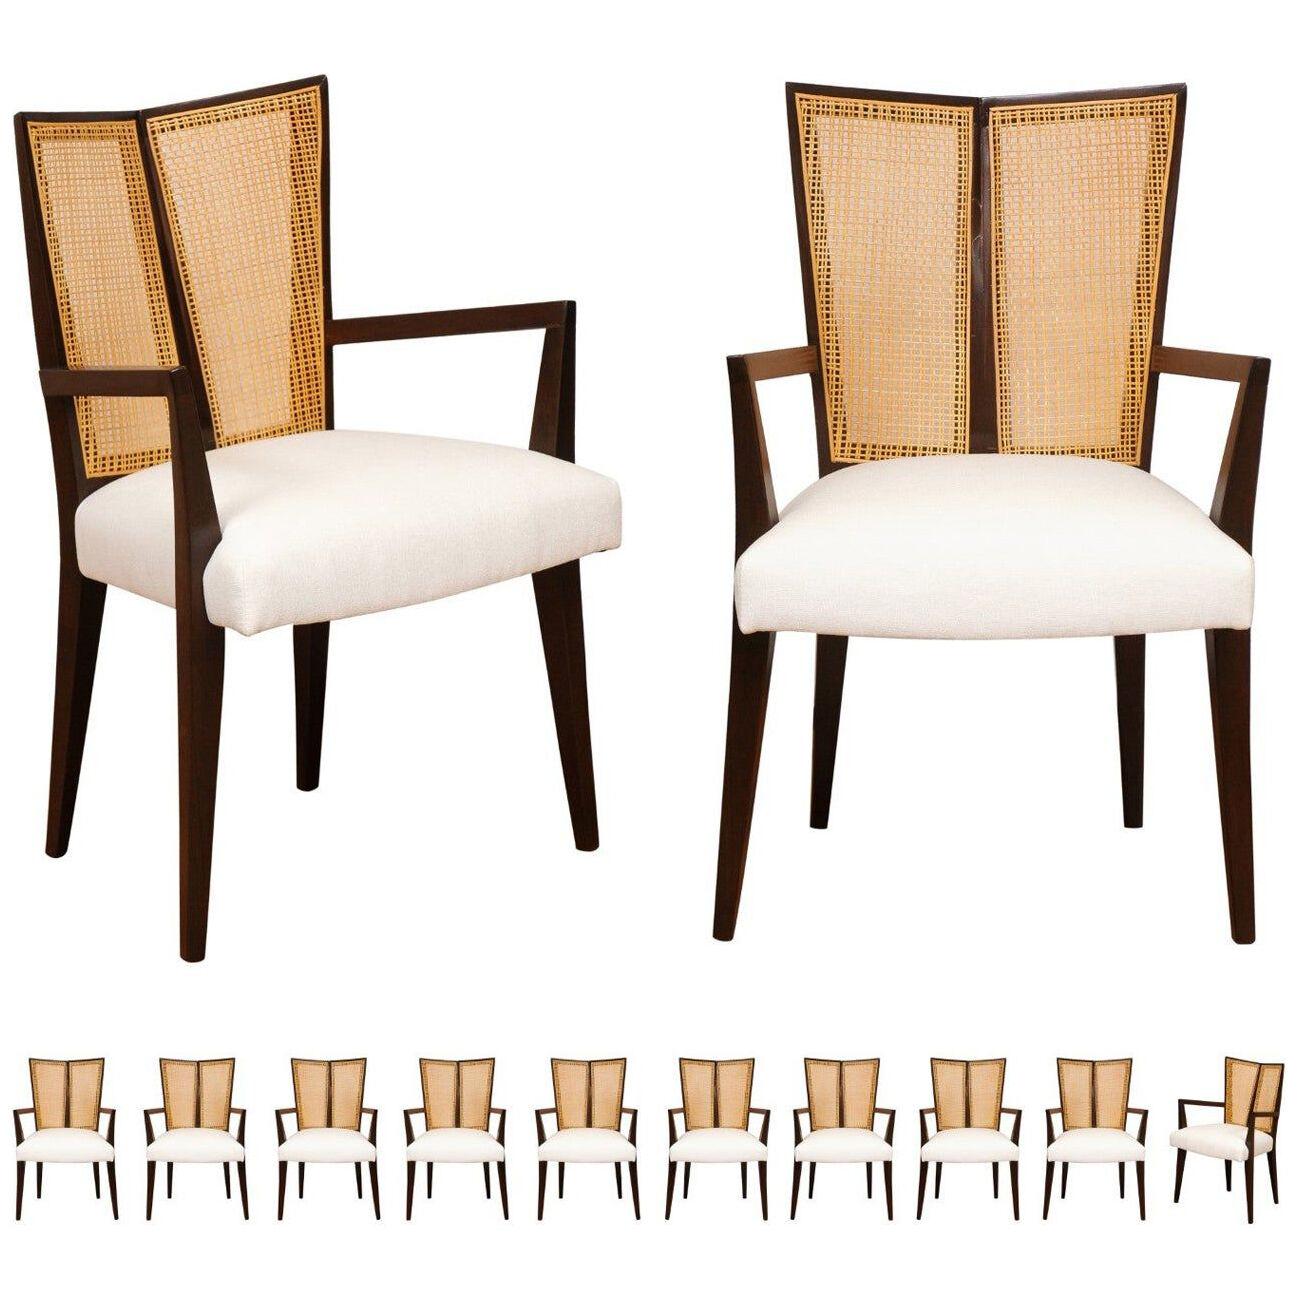 All Arms, Breathtaking Set of 12 Modern V-Back Cane Arm Chairs by Michael Taylor